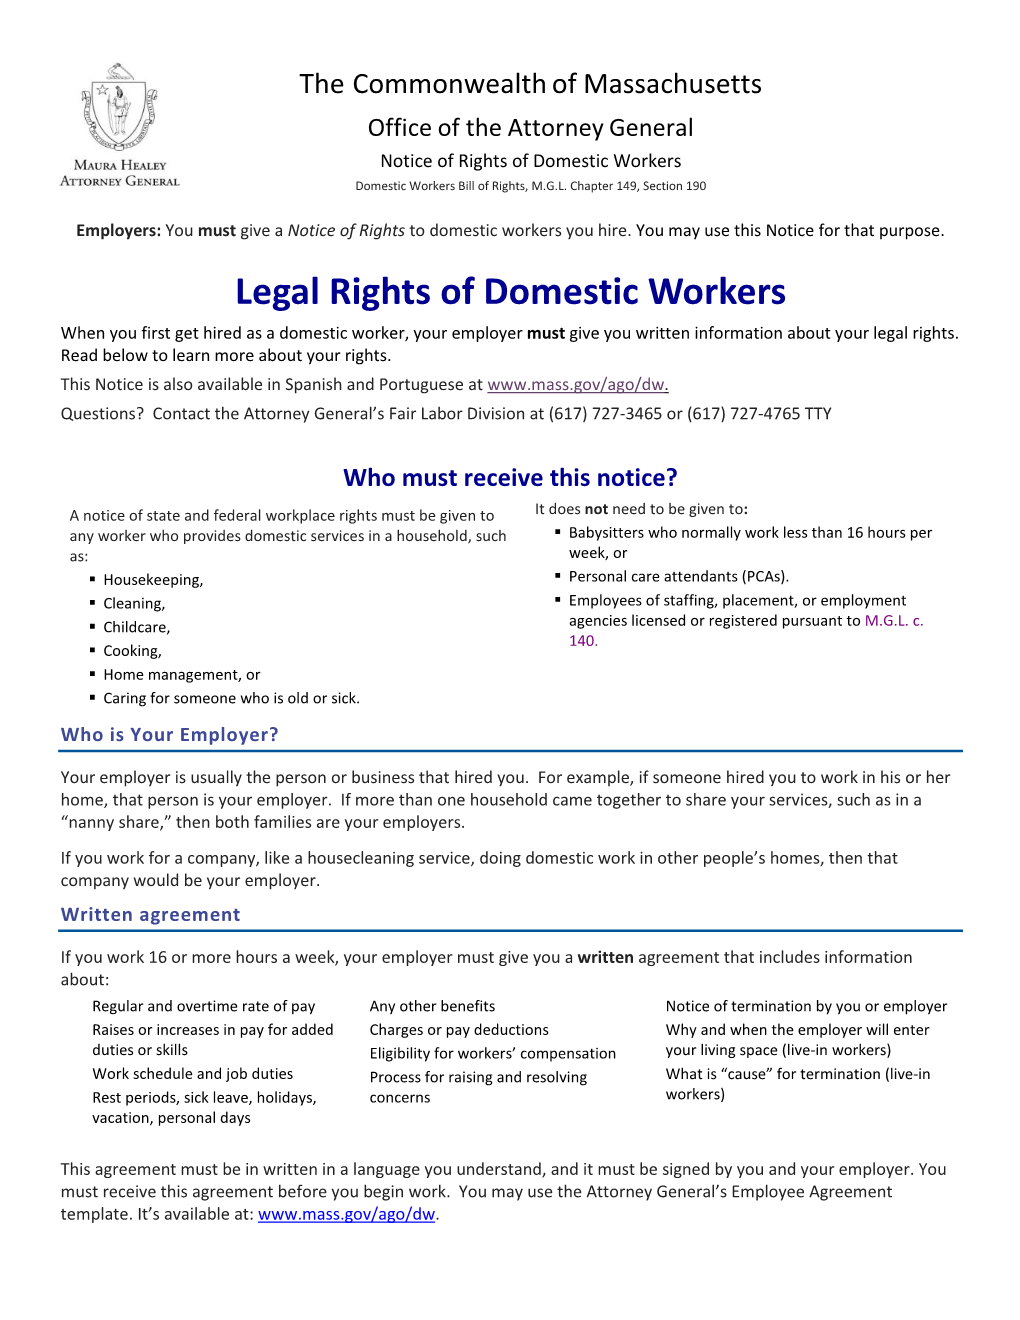 Domestic Worker Rights